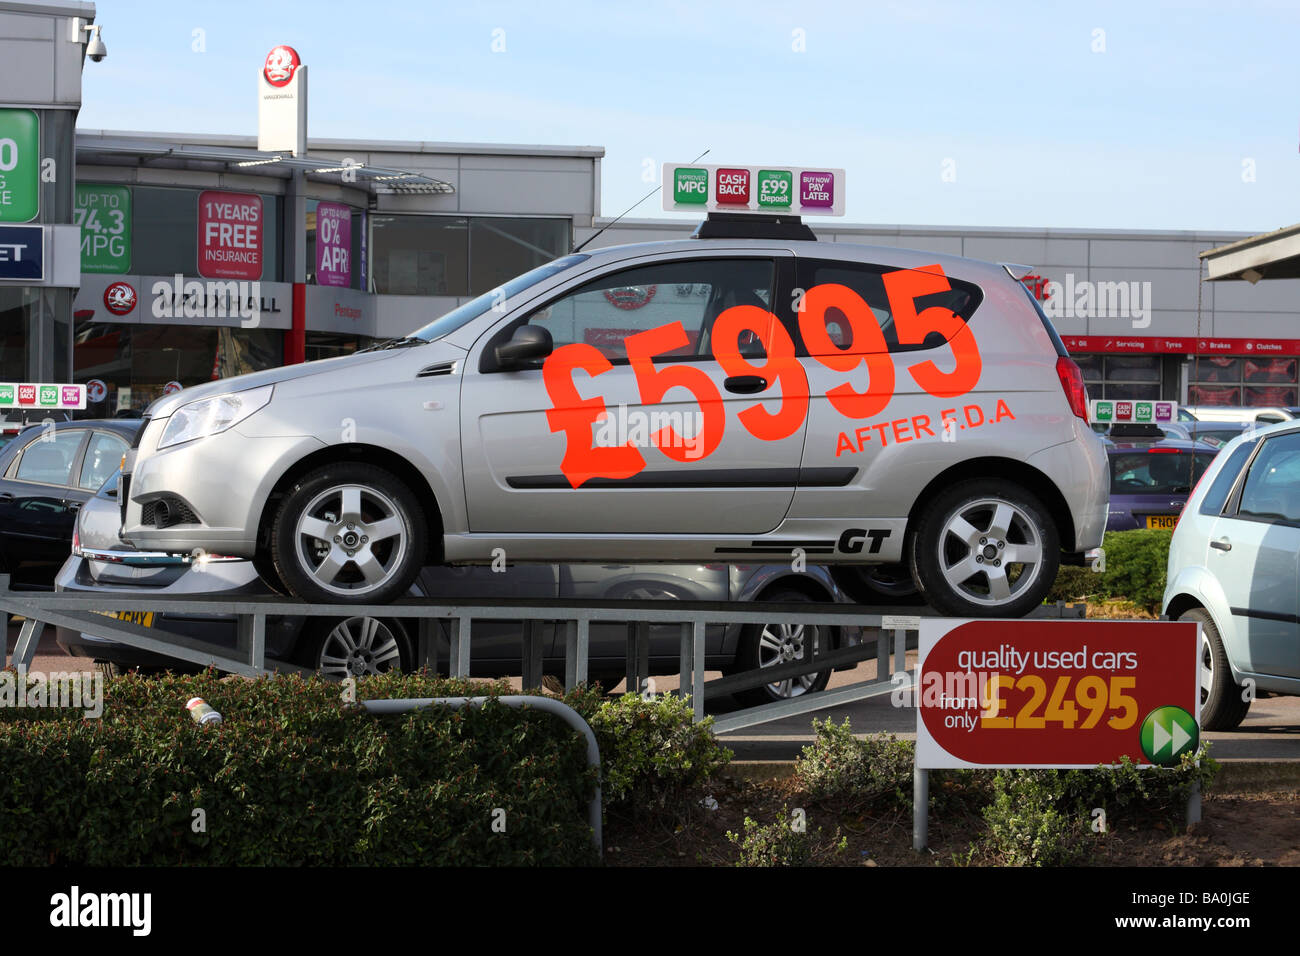 A car for sale at a Vauxhall dealership in a U.K. city. Stock Photo